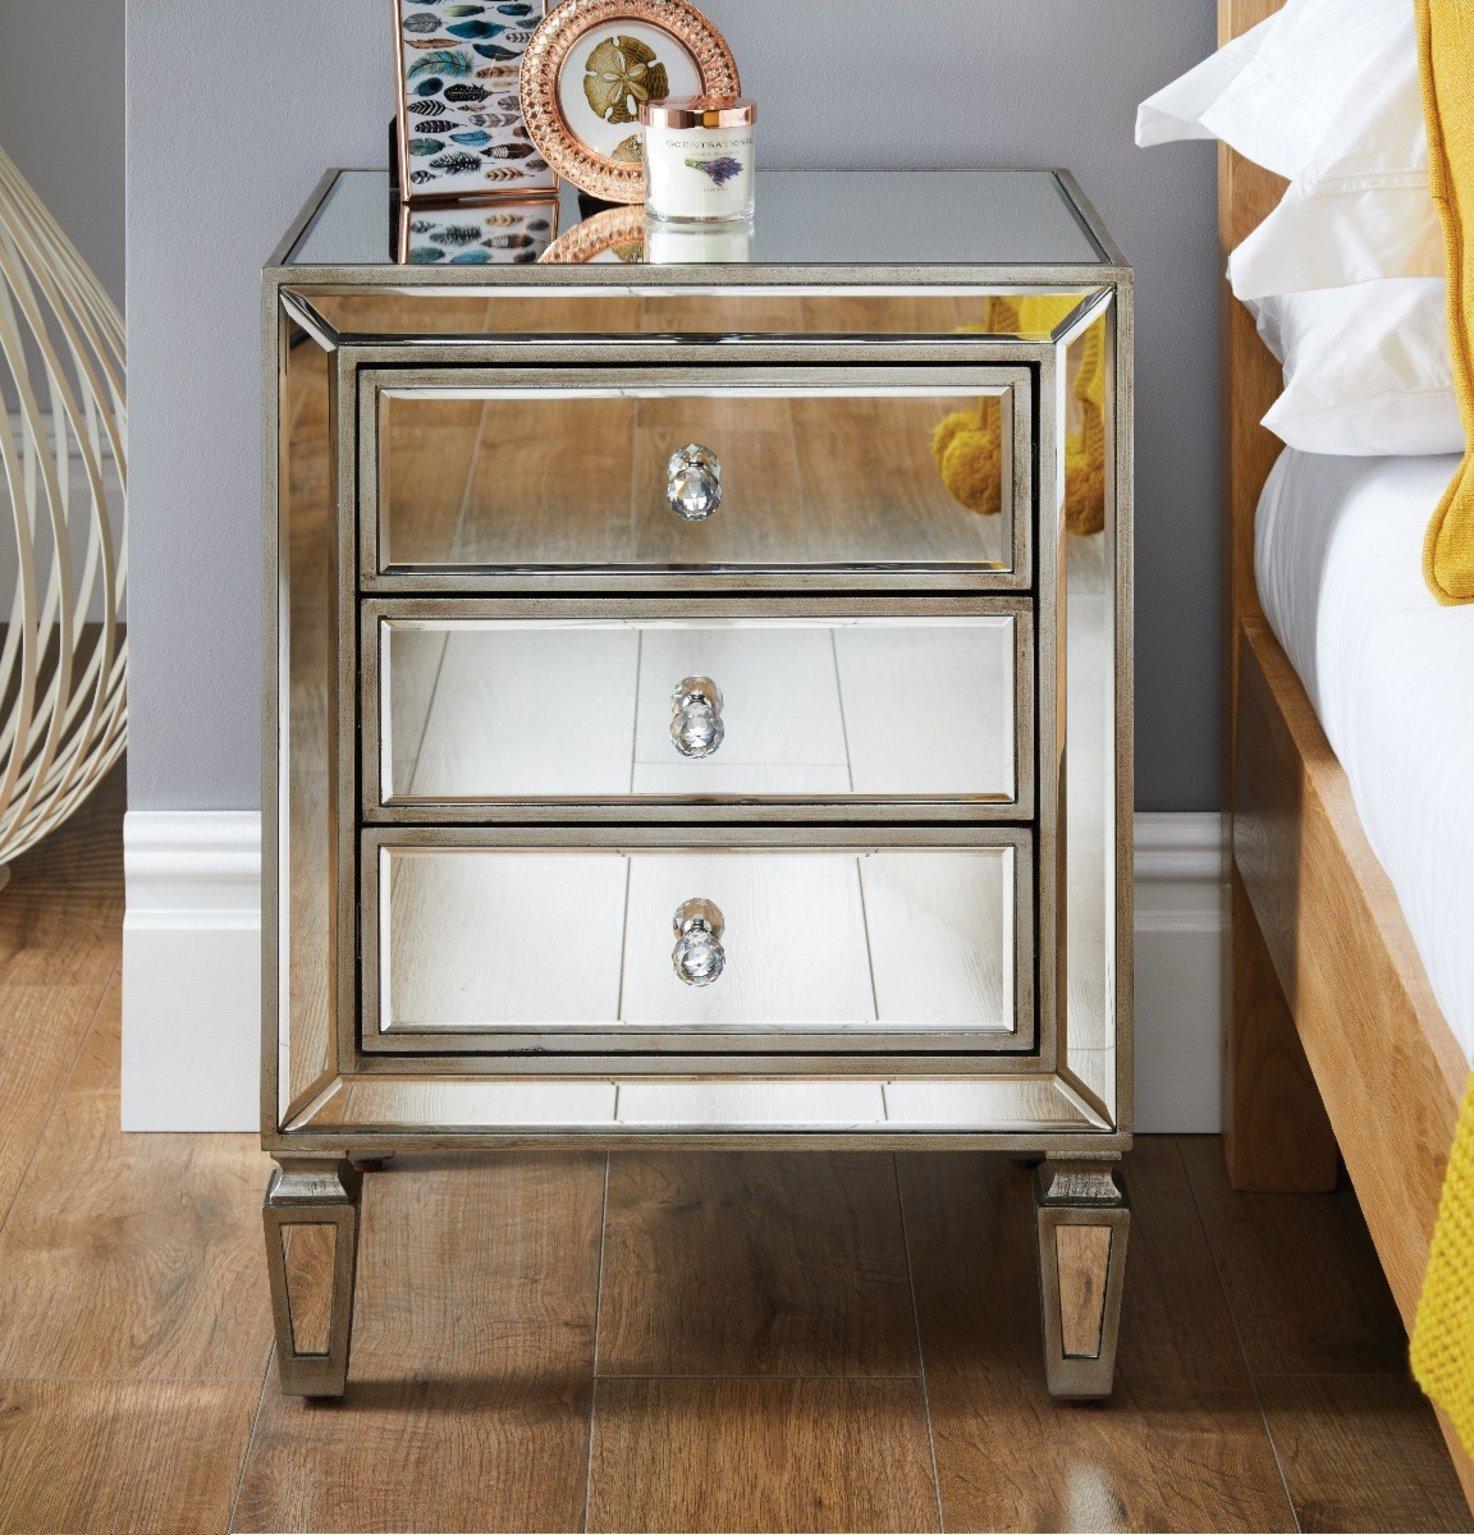 Venice Contemporary 3 Drawer Silver Framed Mirrored Bedside TableWith Crystaline Shaped Handles